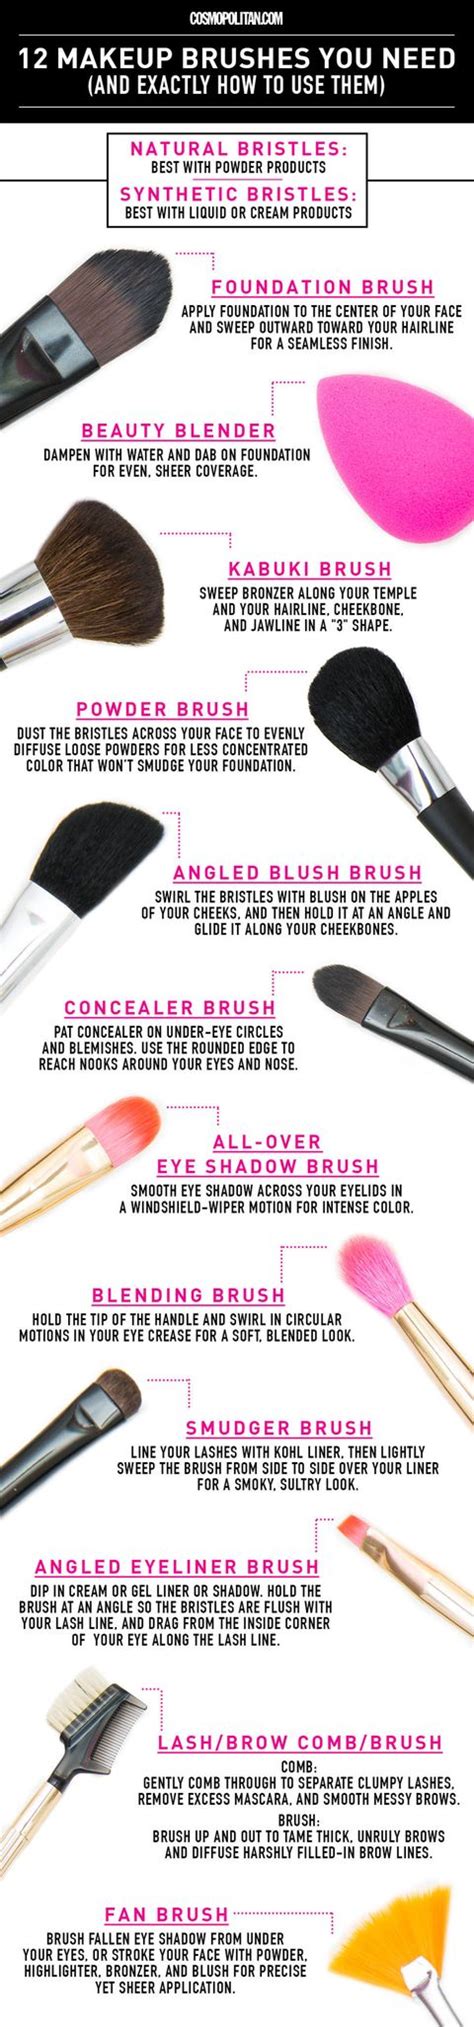 12 makeup brushes you need and how to use them build your own makeup brush set